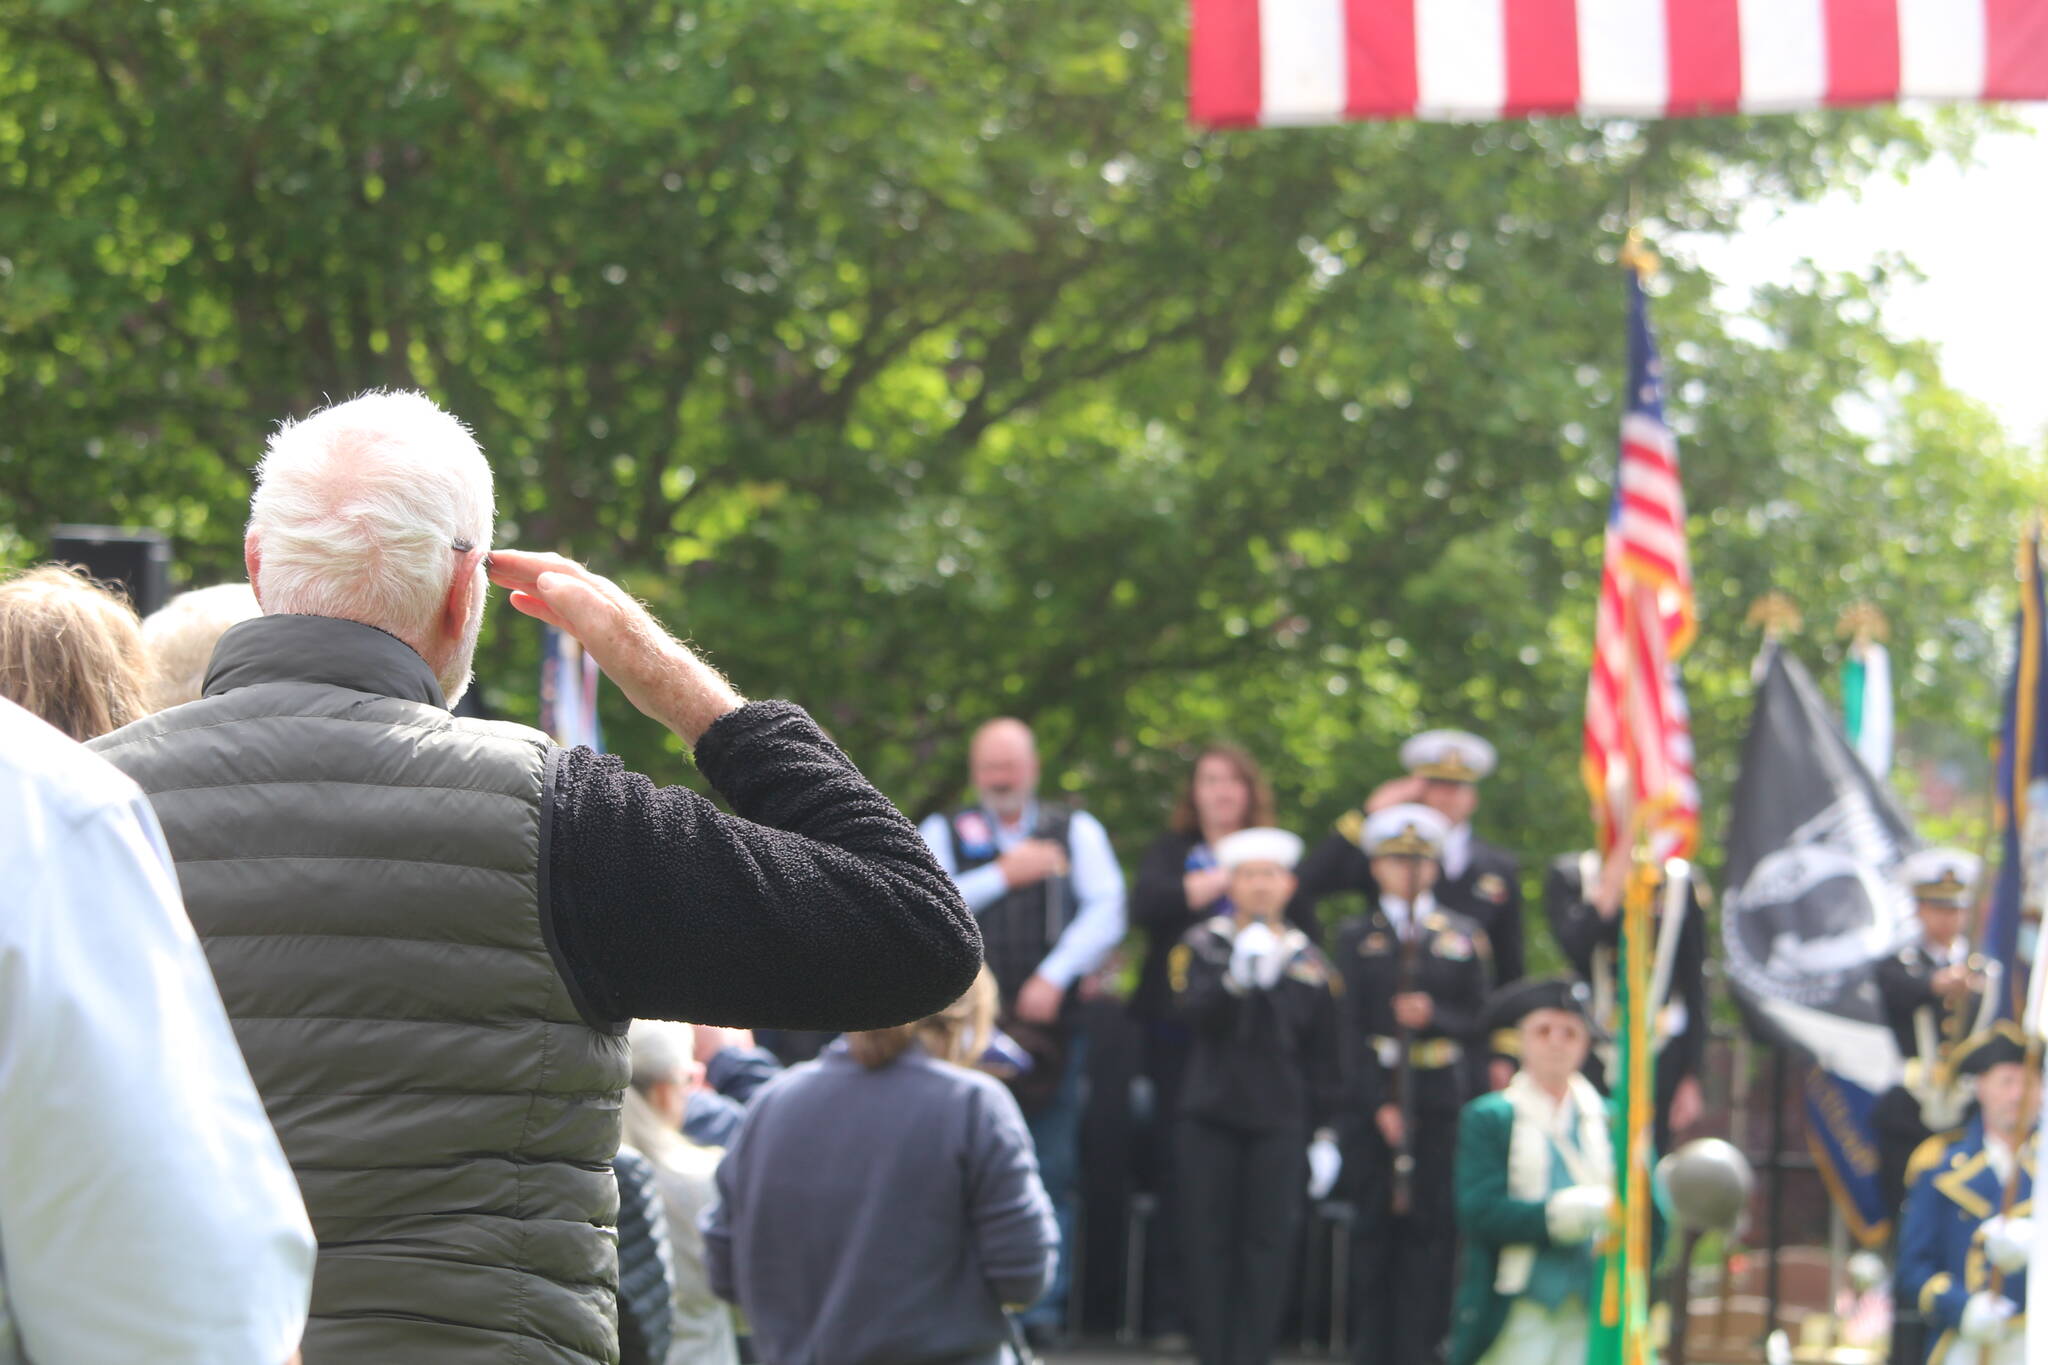 Photo by Karina Andrew/Whidbey News-Times
A member of the crowd at an Oak Harbor Memorial Day service salutes the flag.